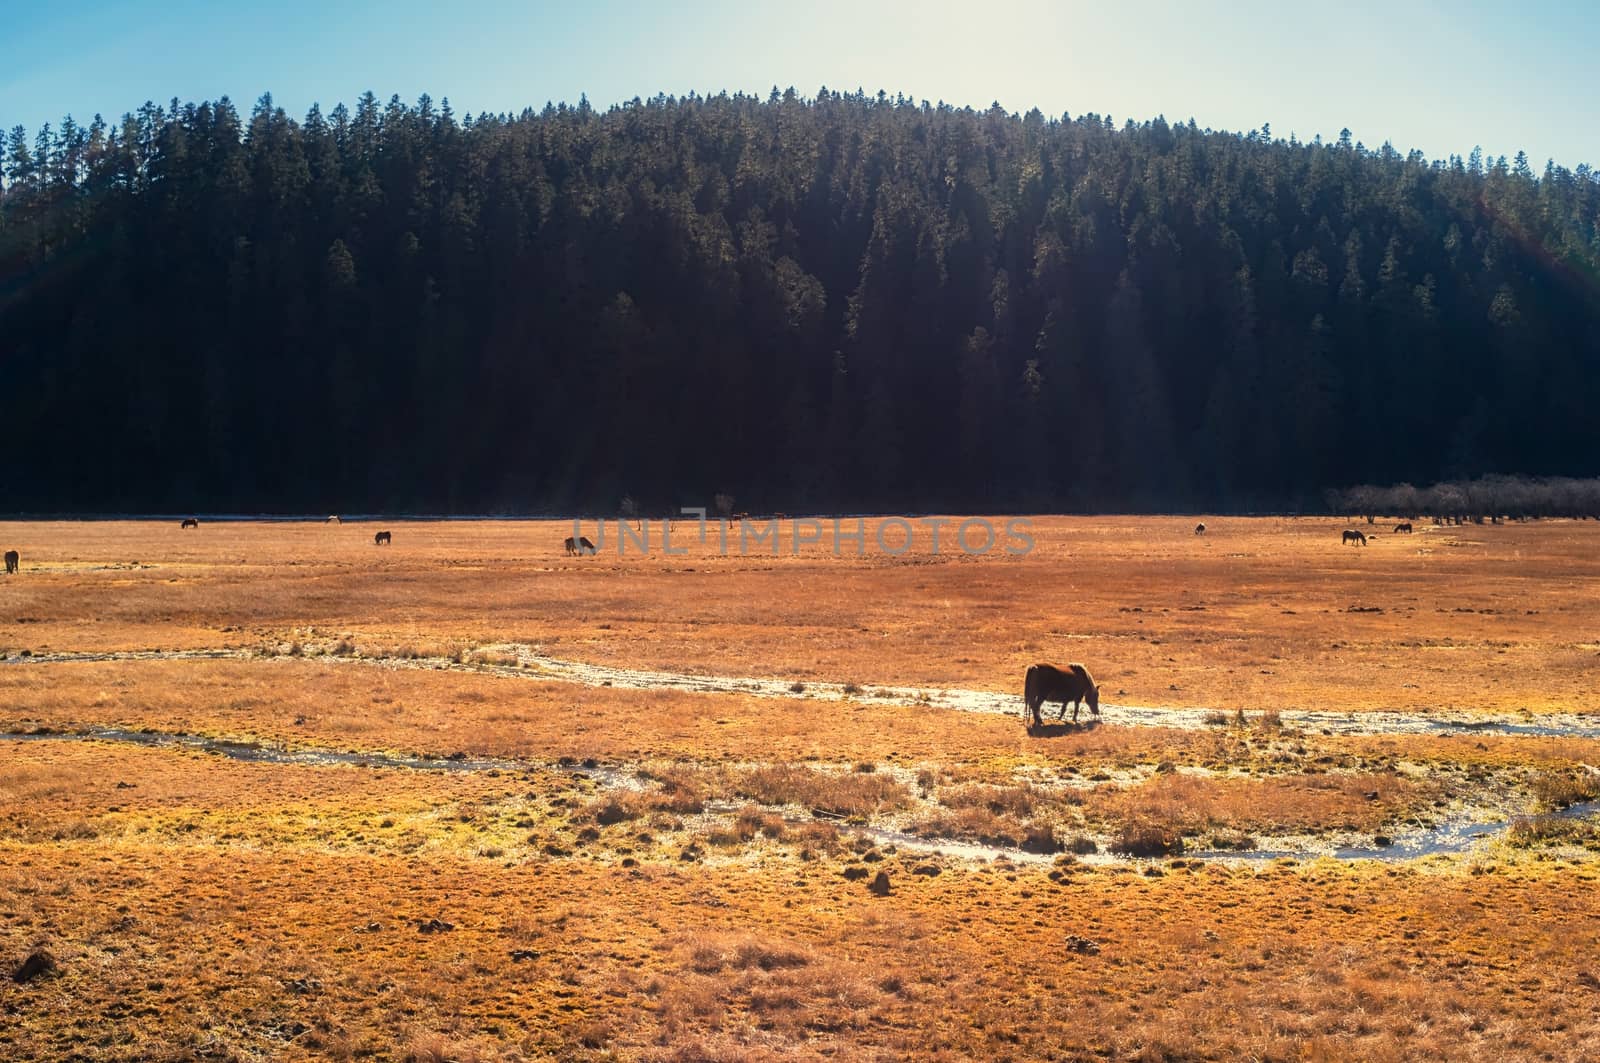 Horse grazing on pasture in Pudacuo National Park, Shangri-la, China